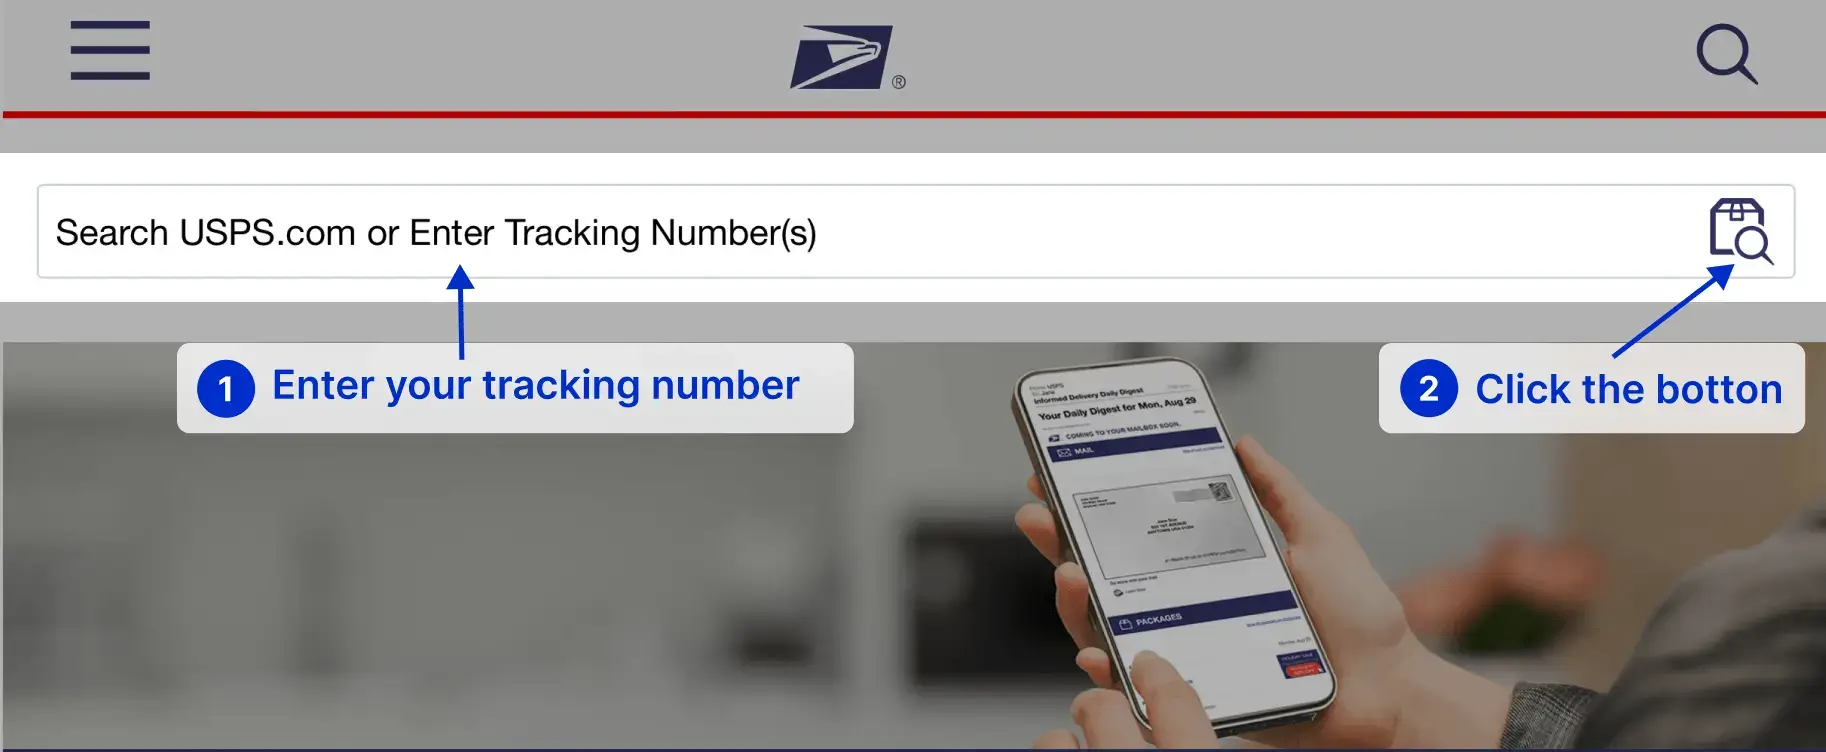 USPS Tracking. Learn how to track packages via USPS official webiste on your mobiel phone. Enter your tracking number on the USPS tarcking page.